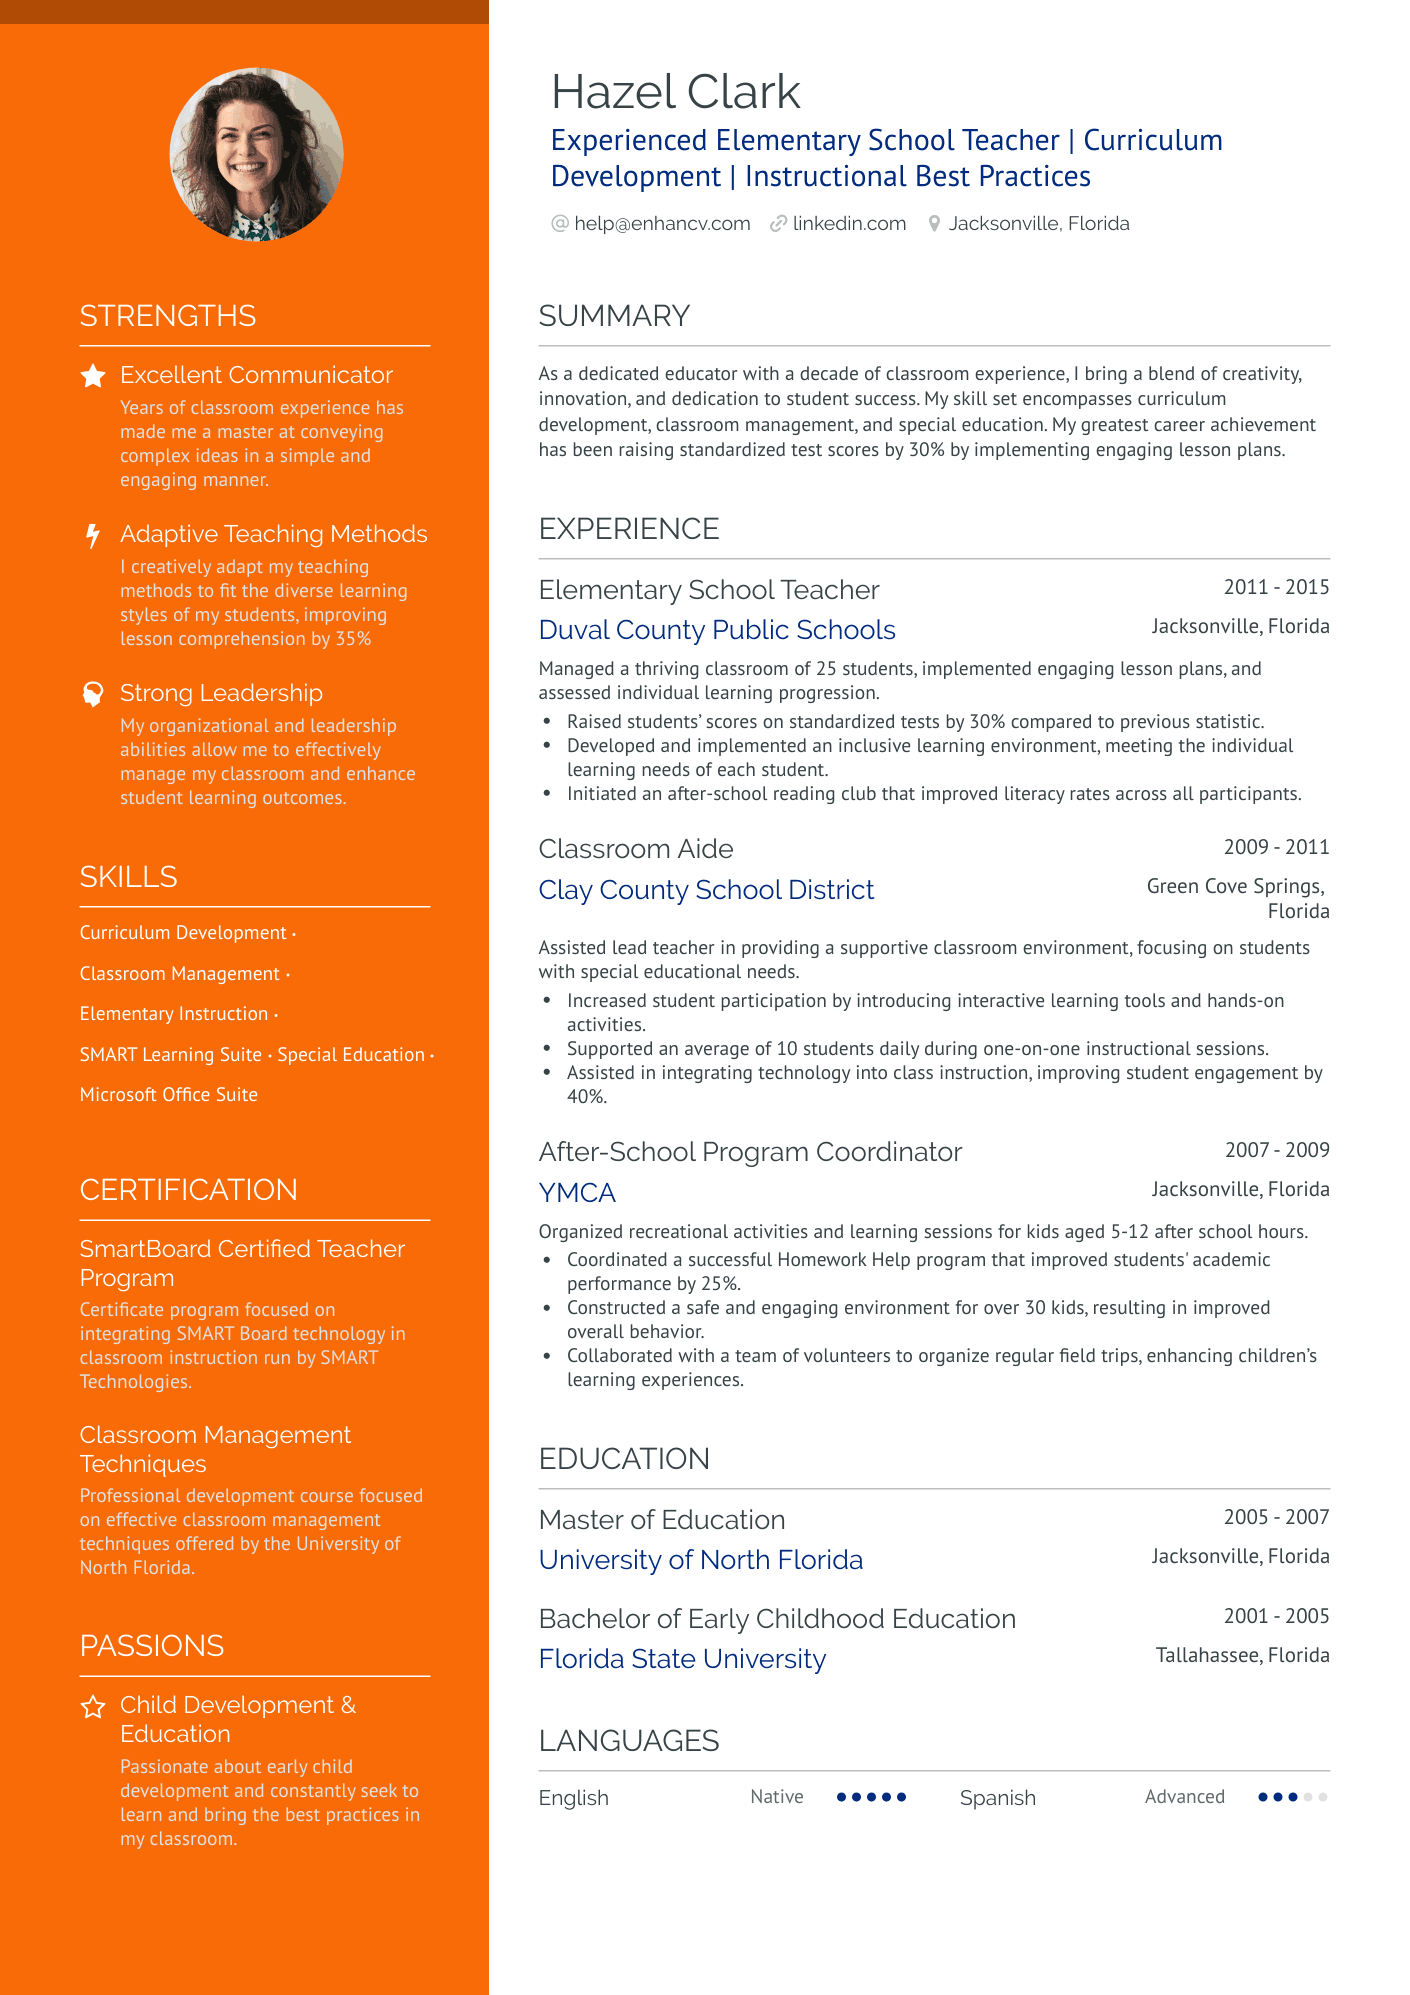 stay at home mom summary for resume